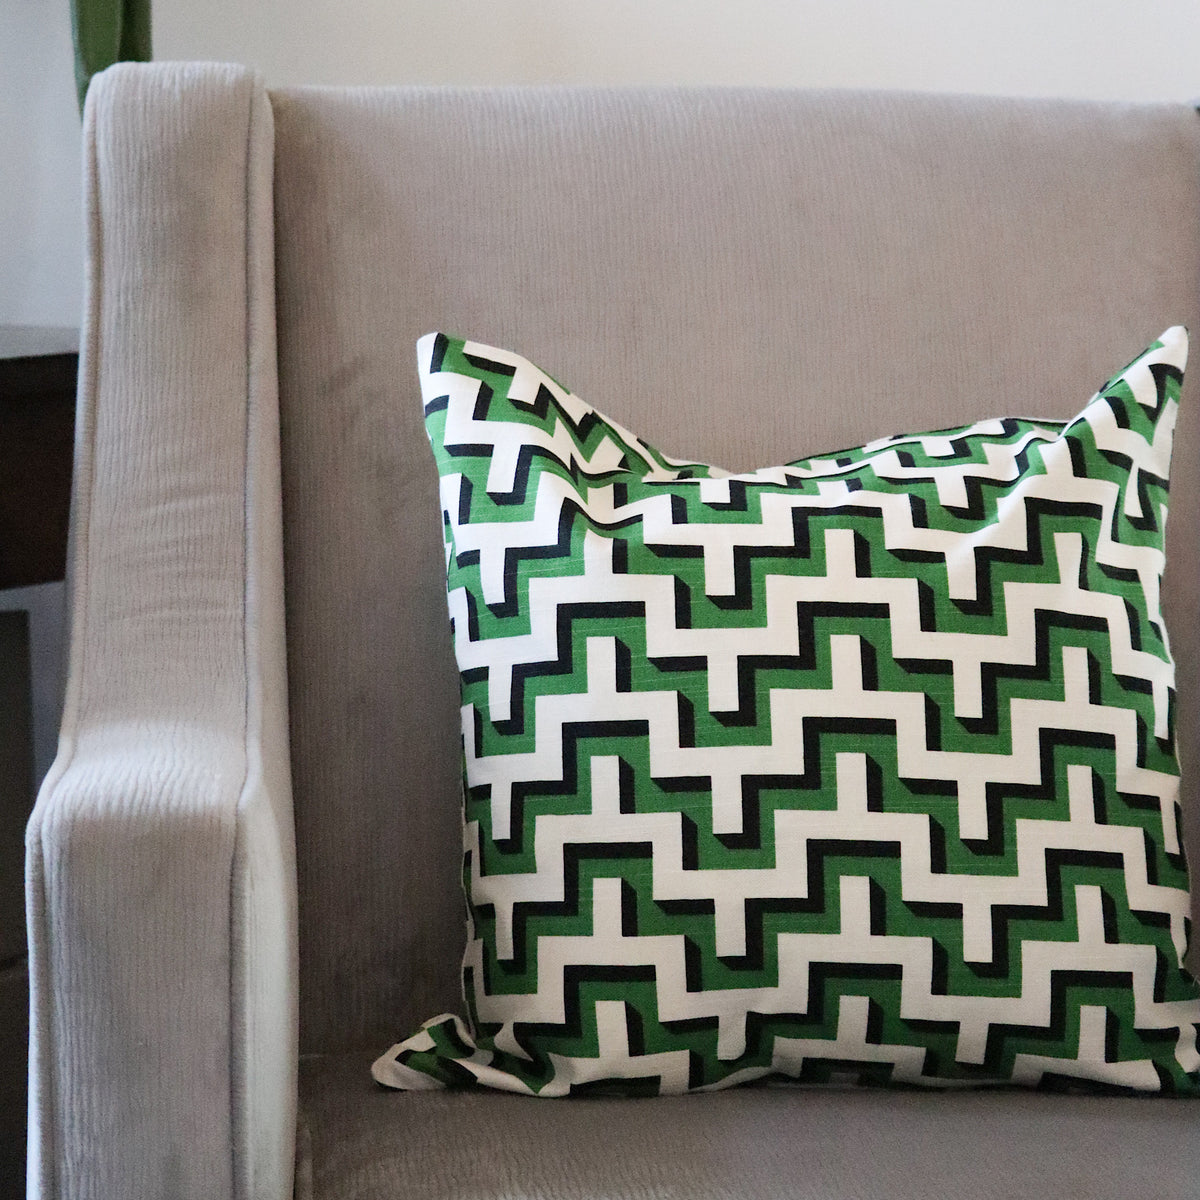 18 x 18 Pattern Pillow Cover